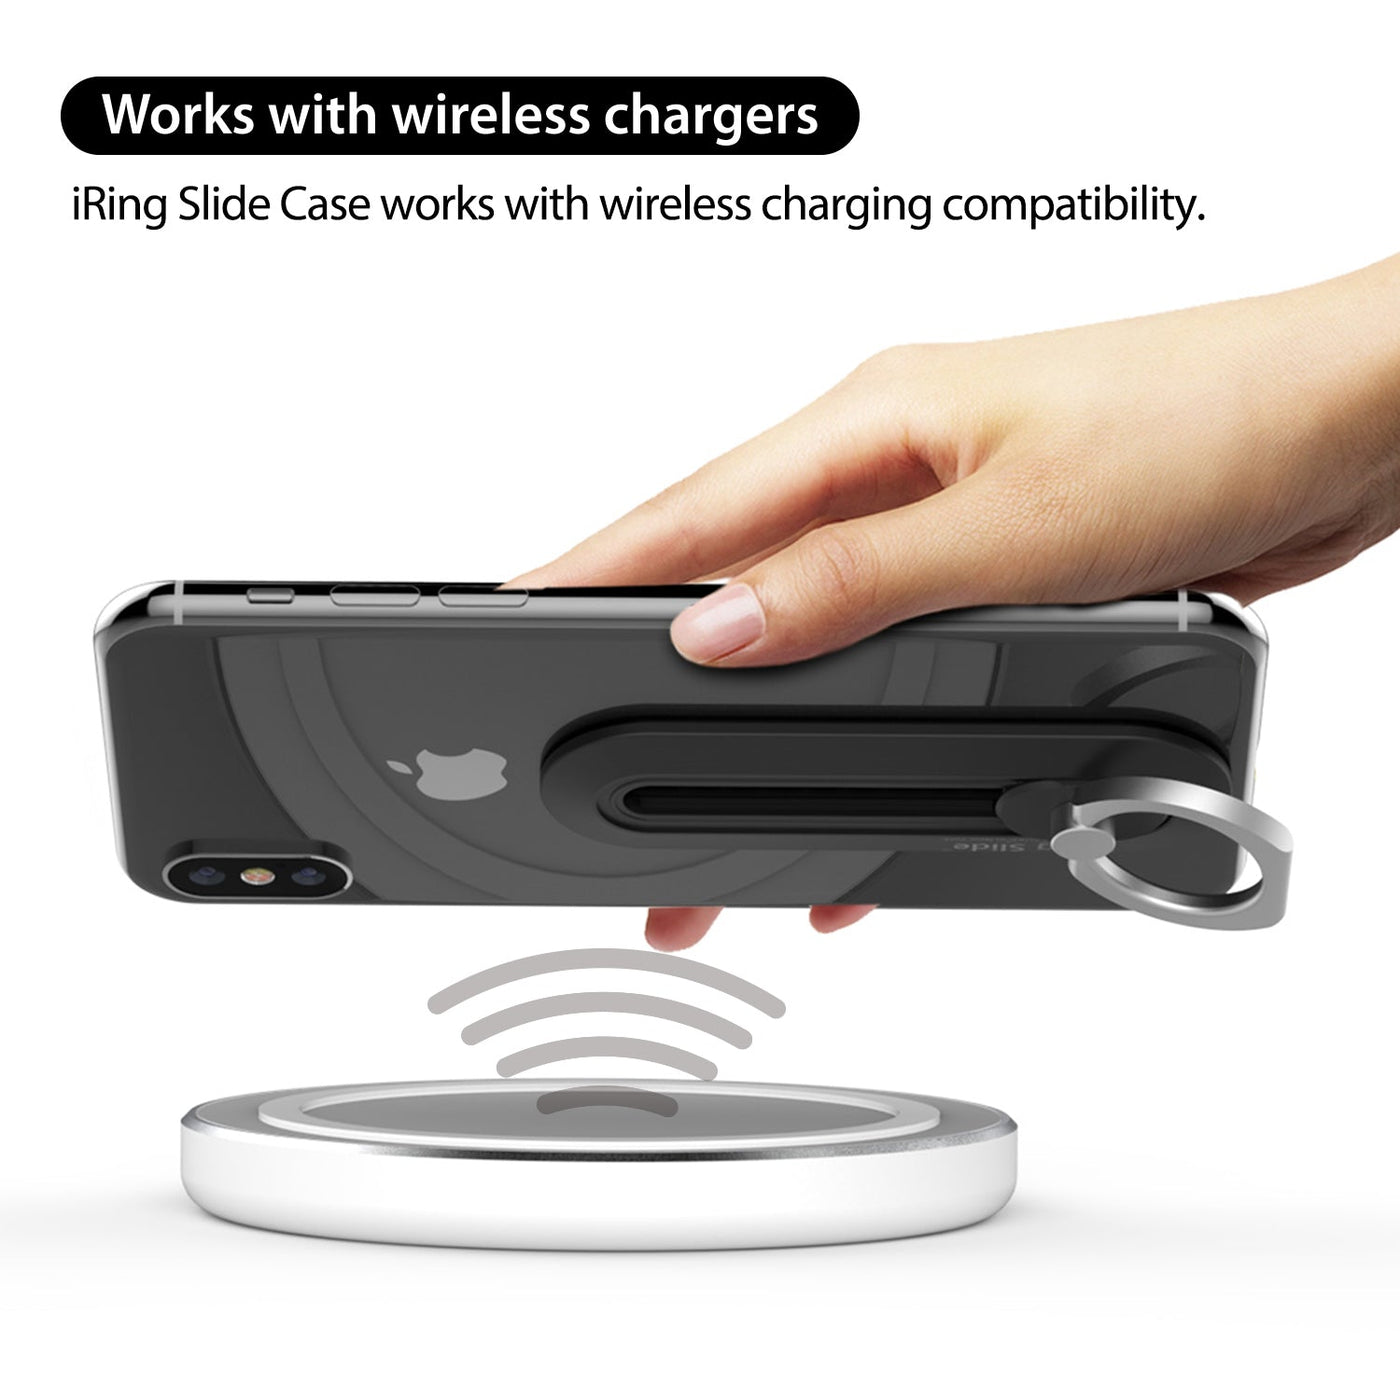 2-Pack iRing Slide - Works with wireless chargers